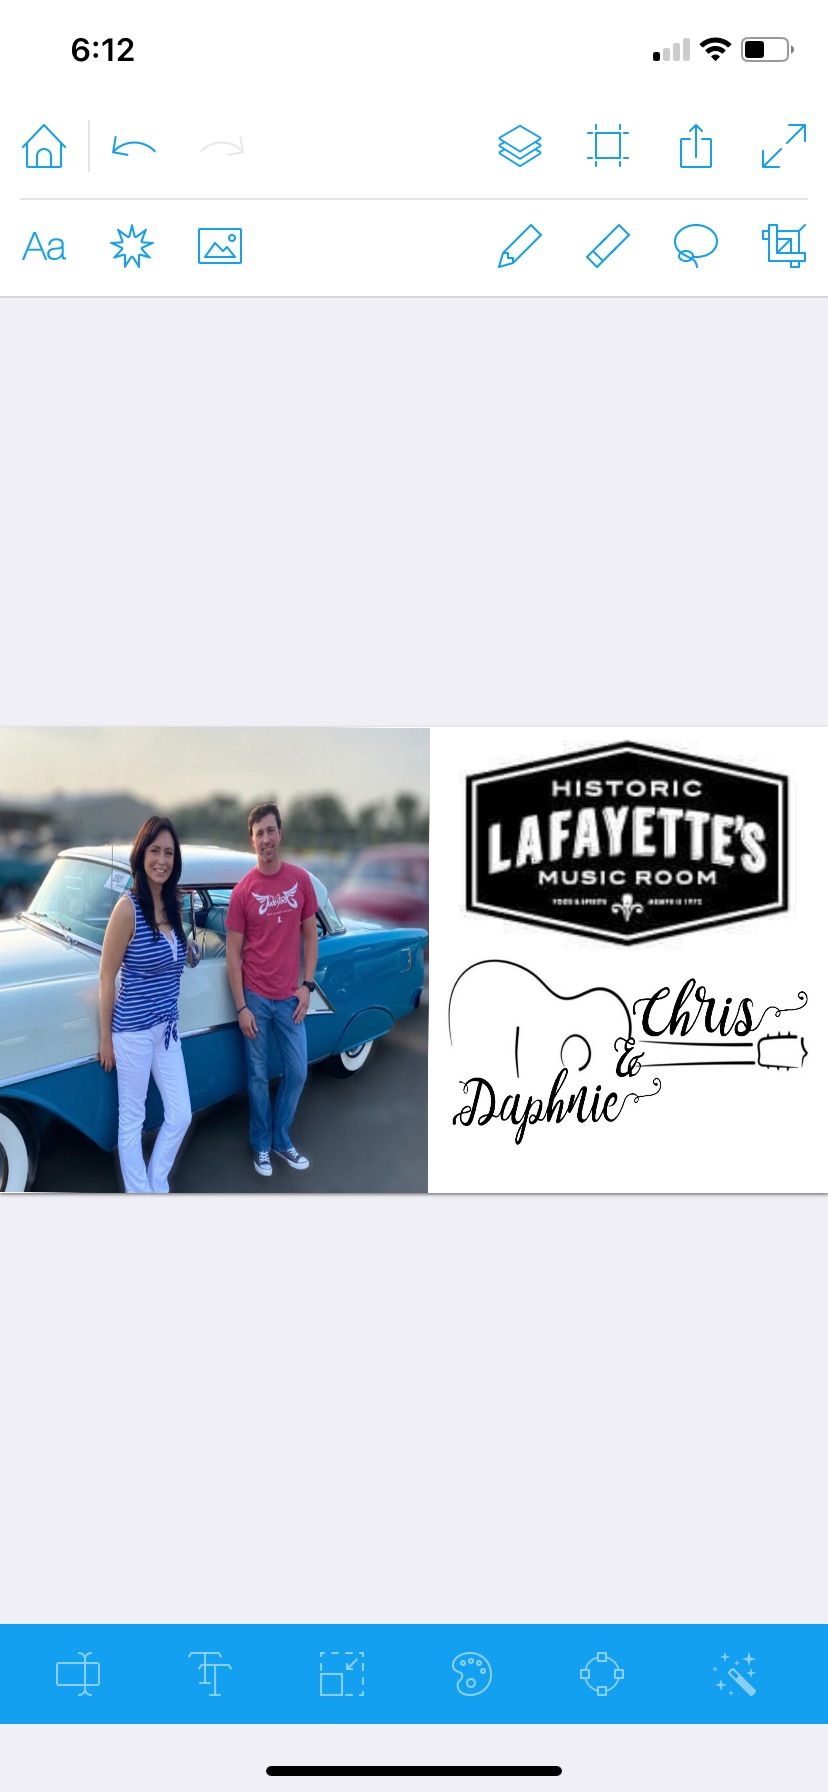 Daphnie and Chris Debut at Lafayette\u2019s  